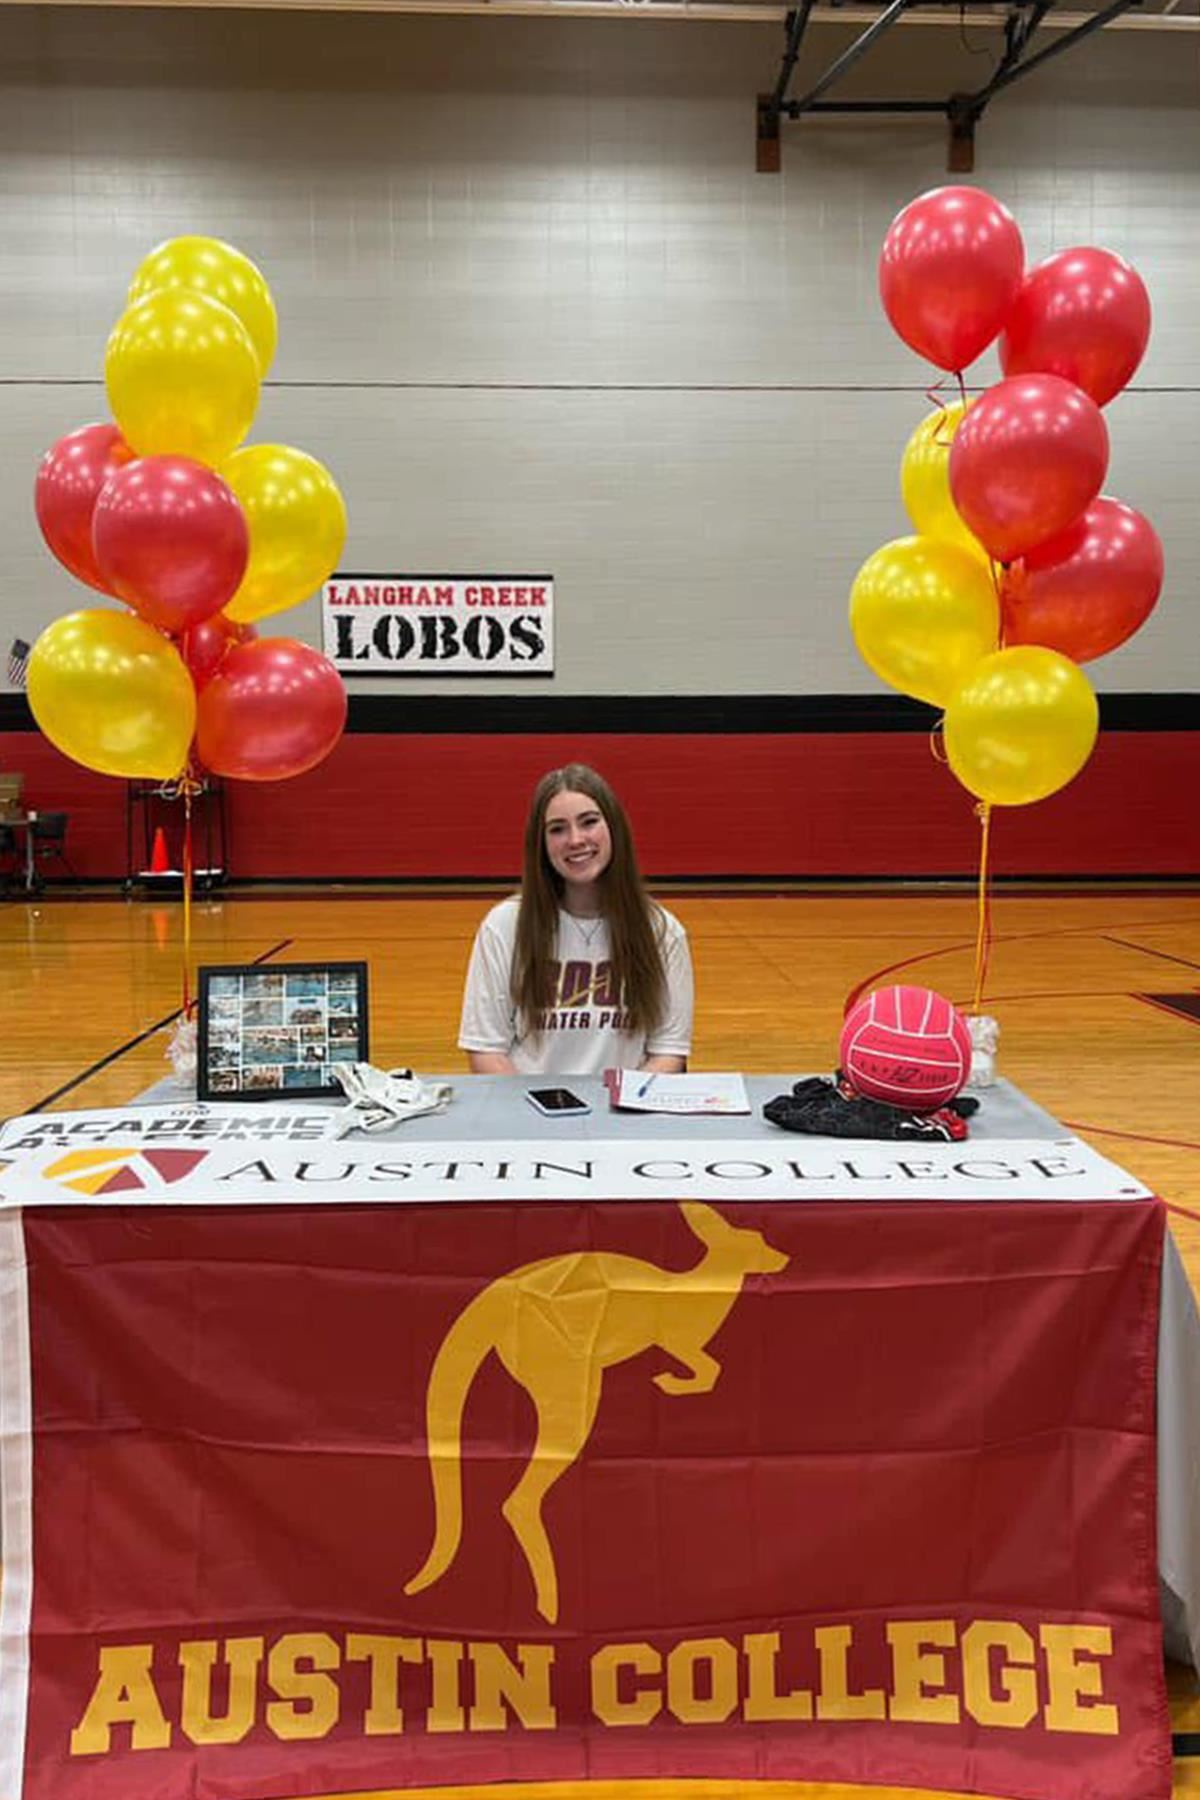 Langham Creek High School senior Morgan Evans signed a letter of intent to play water polo at Austin College.